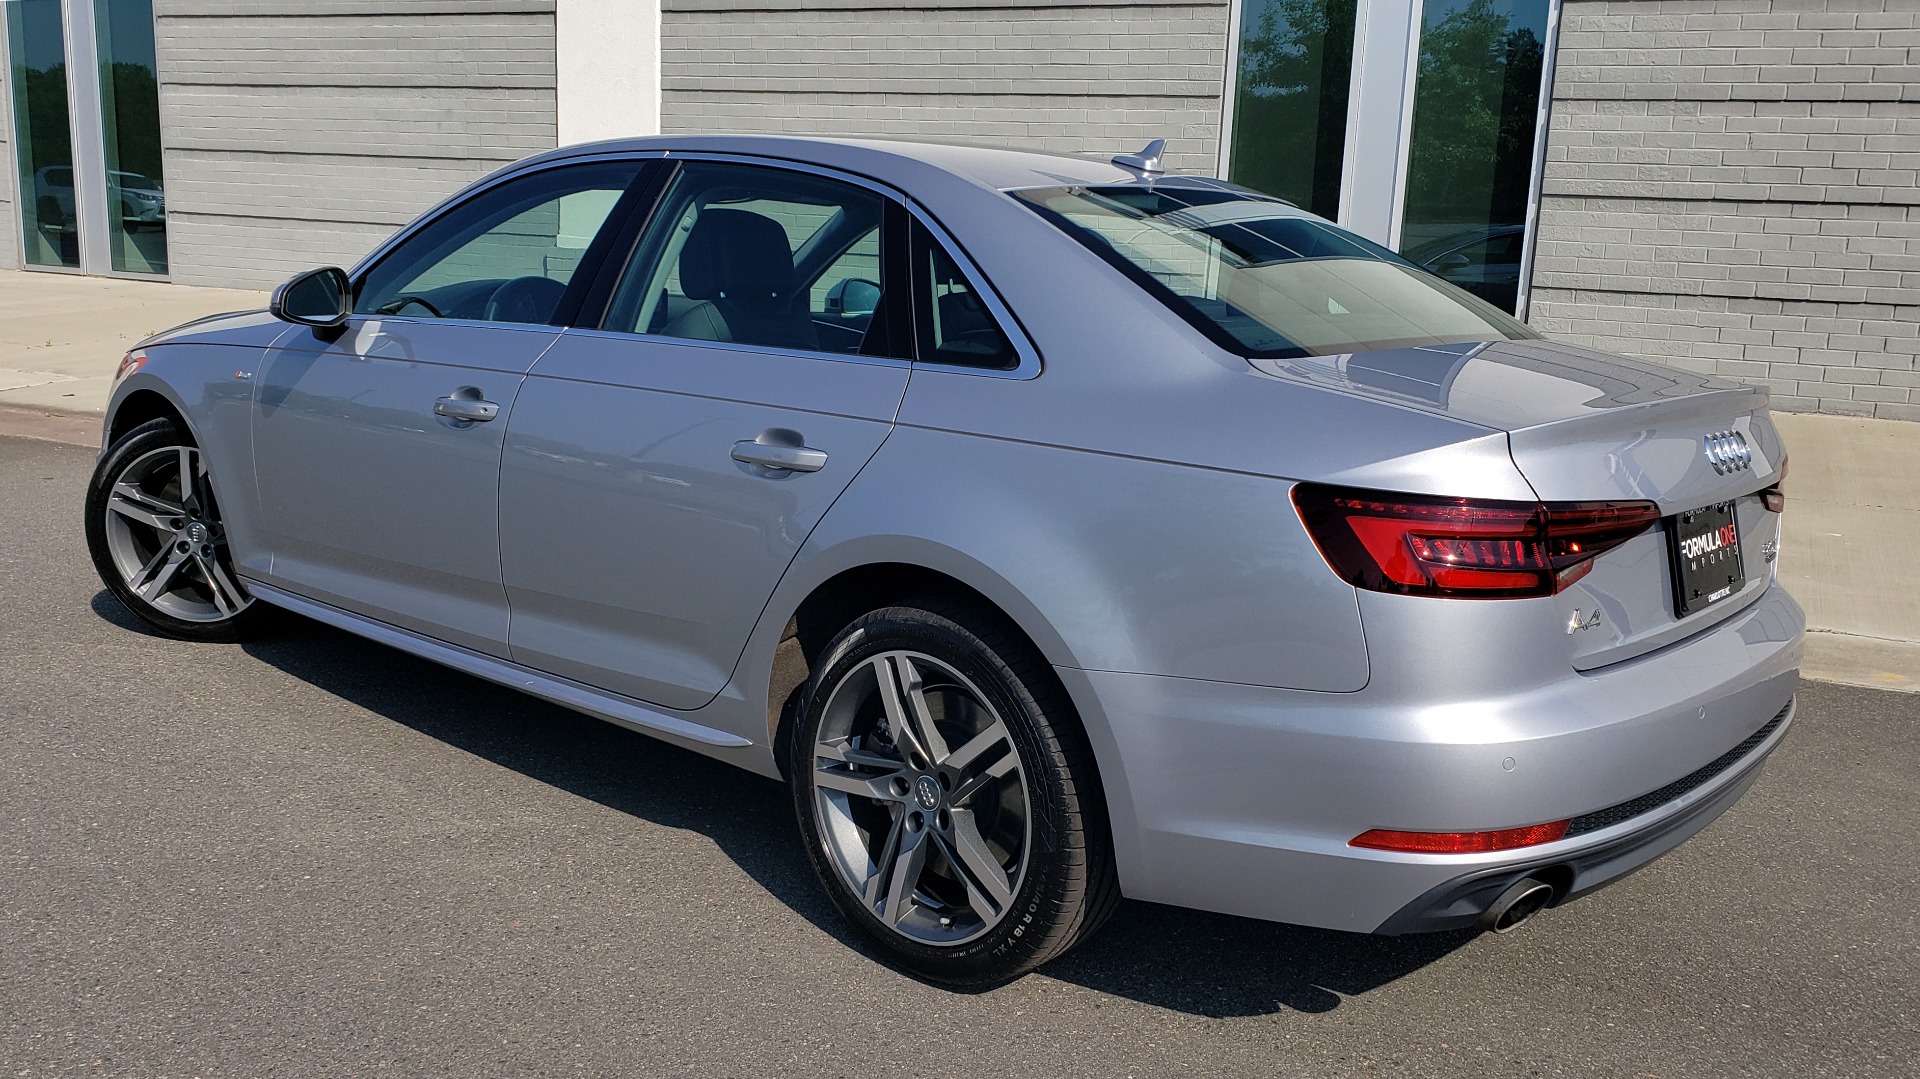 Used 2018 Audi A4 PREMIUM PLUS 2.0T / NAV / SUNROOF / B&O SND / CLD WTHR / REARVIEW for sale Sold at Formula Imports in Charlotte NC 28227 2